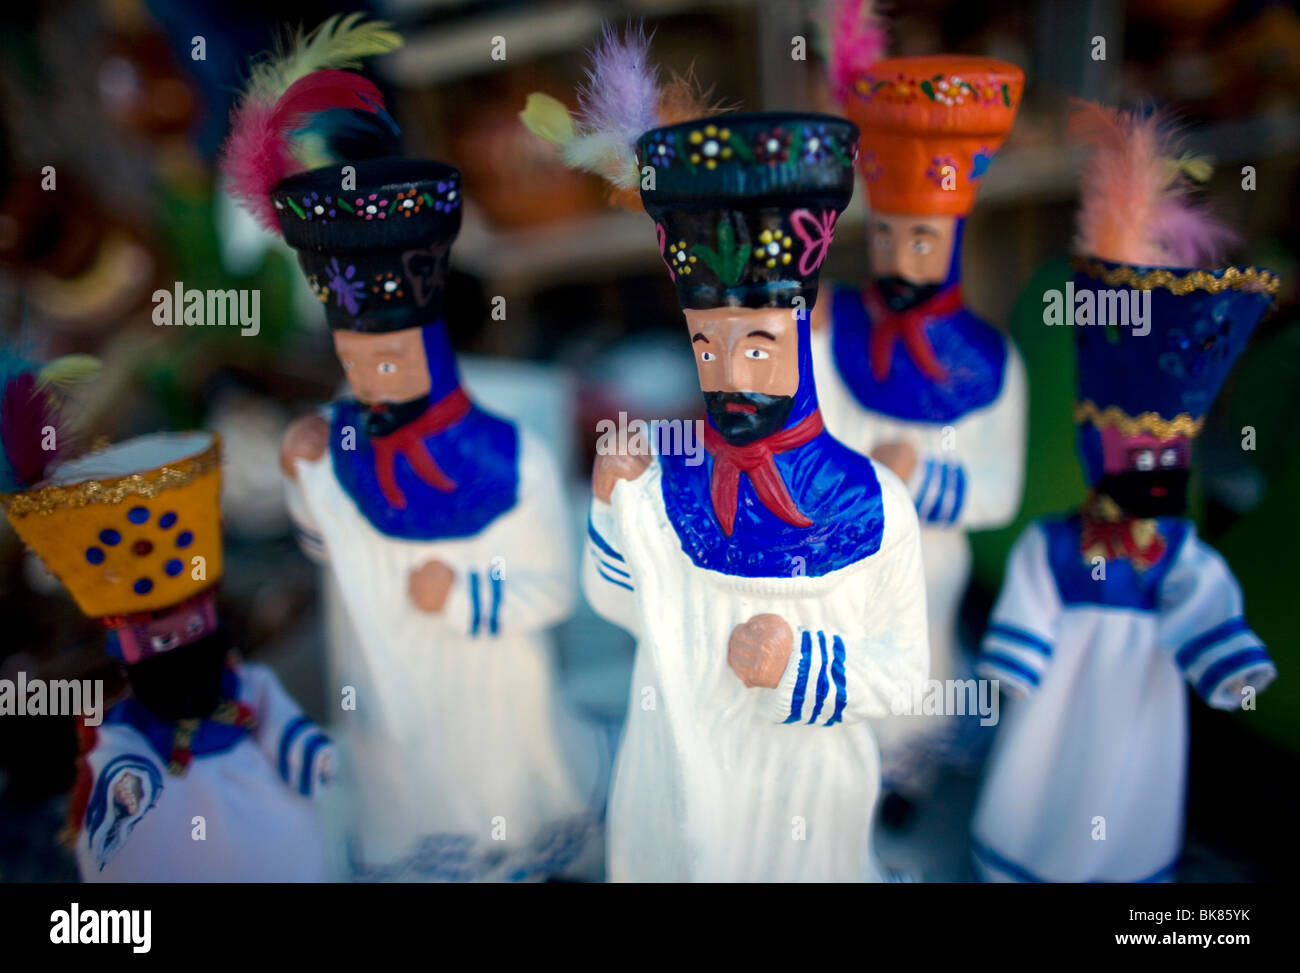 Statues of Chinelos sit for sales during carnival celebrations in Tlayacapan, Mexico Stock Photo